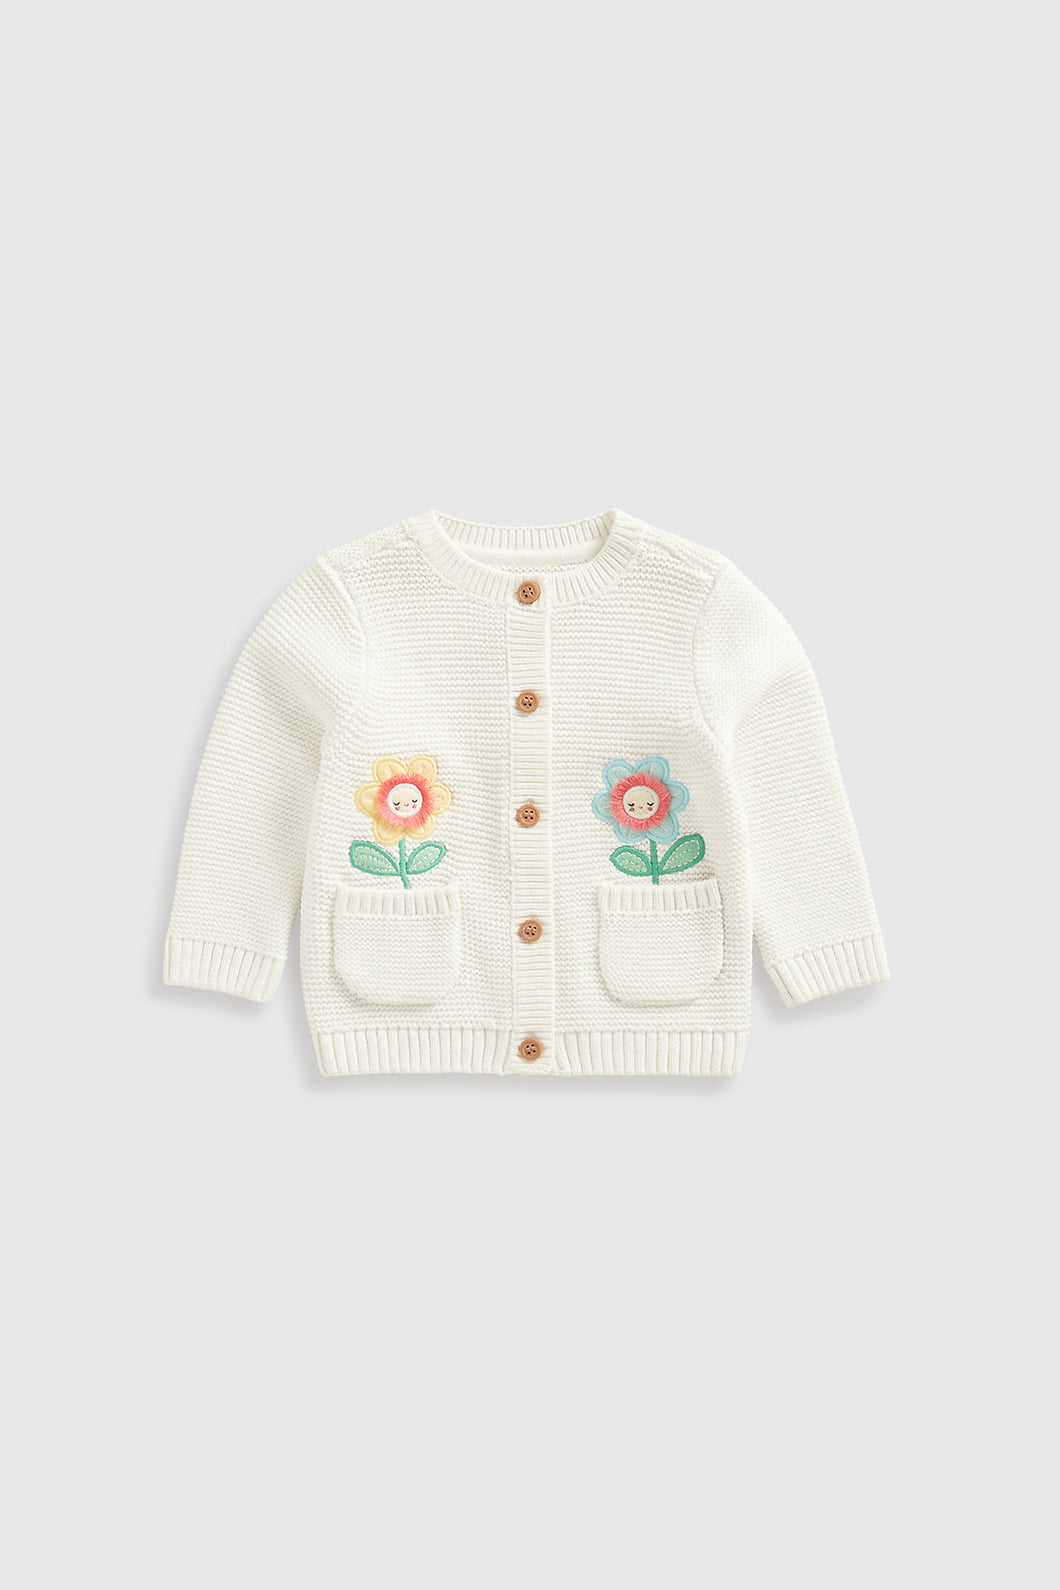 Mothercare Flower Pocket Knitted Cardigan